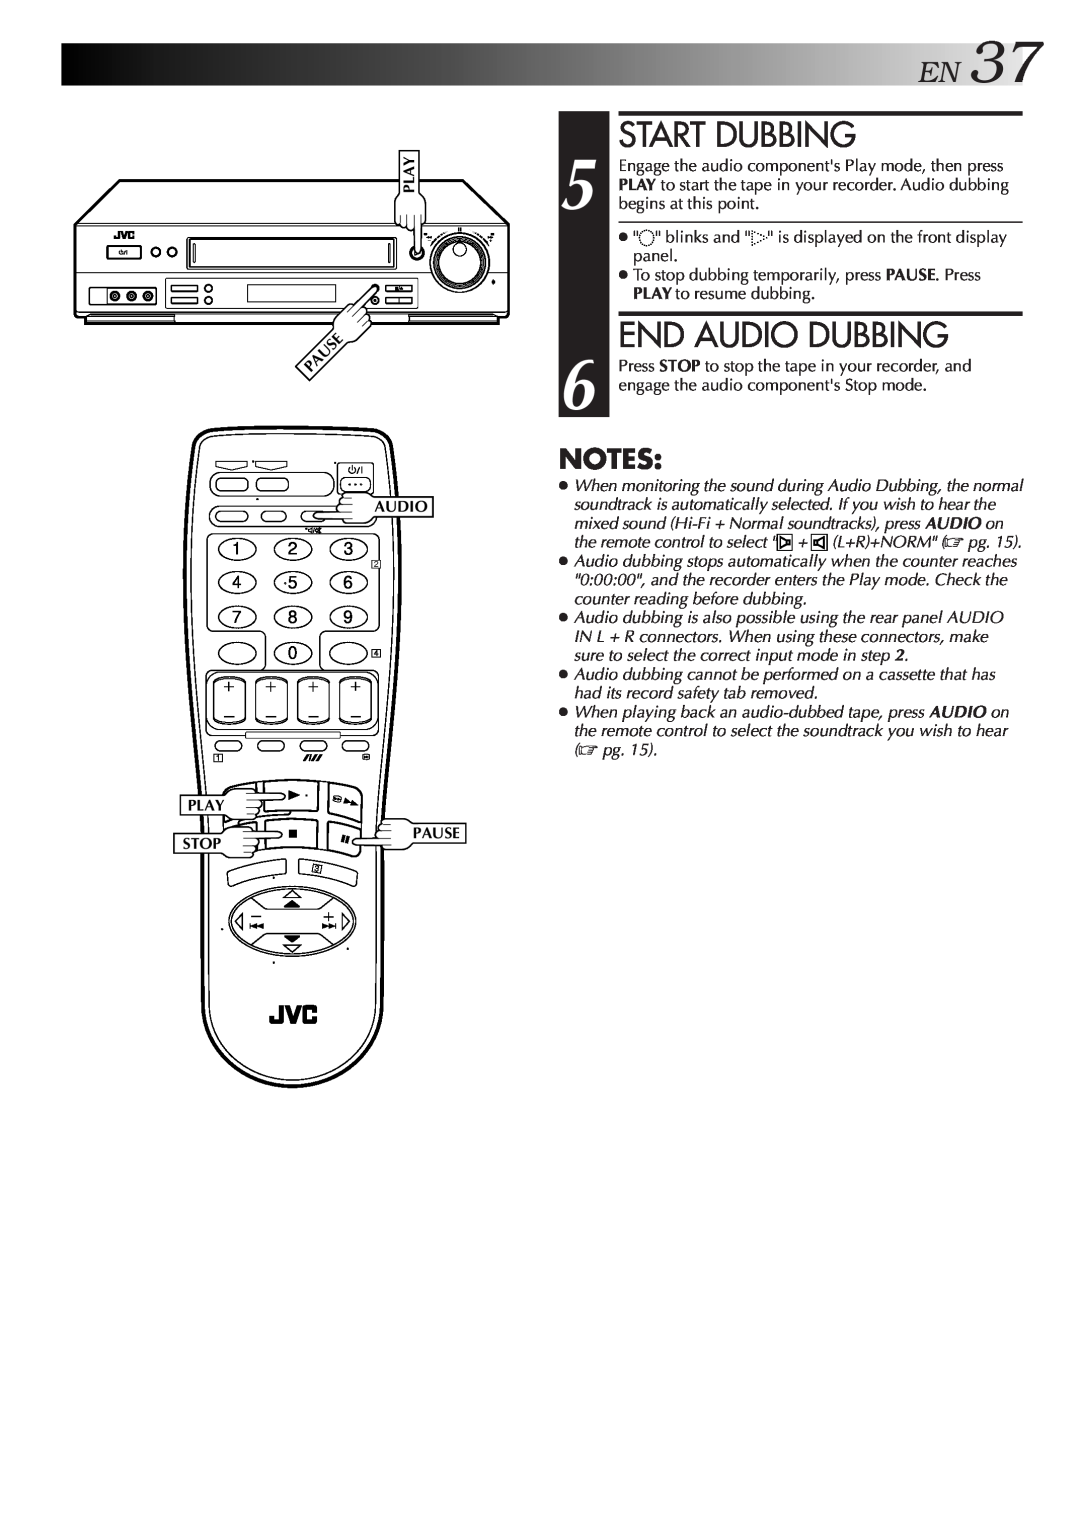 JVC HR-DD857MS EN37, Start Dubbing, End Audio Dubbing, the remote control to select + L+R+NORM pg, Play, Stop, Pause 